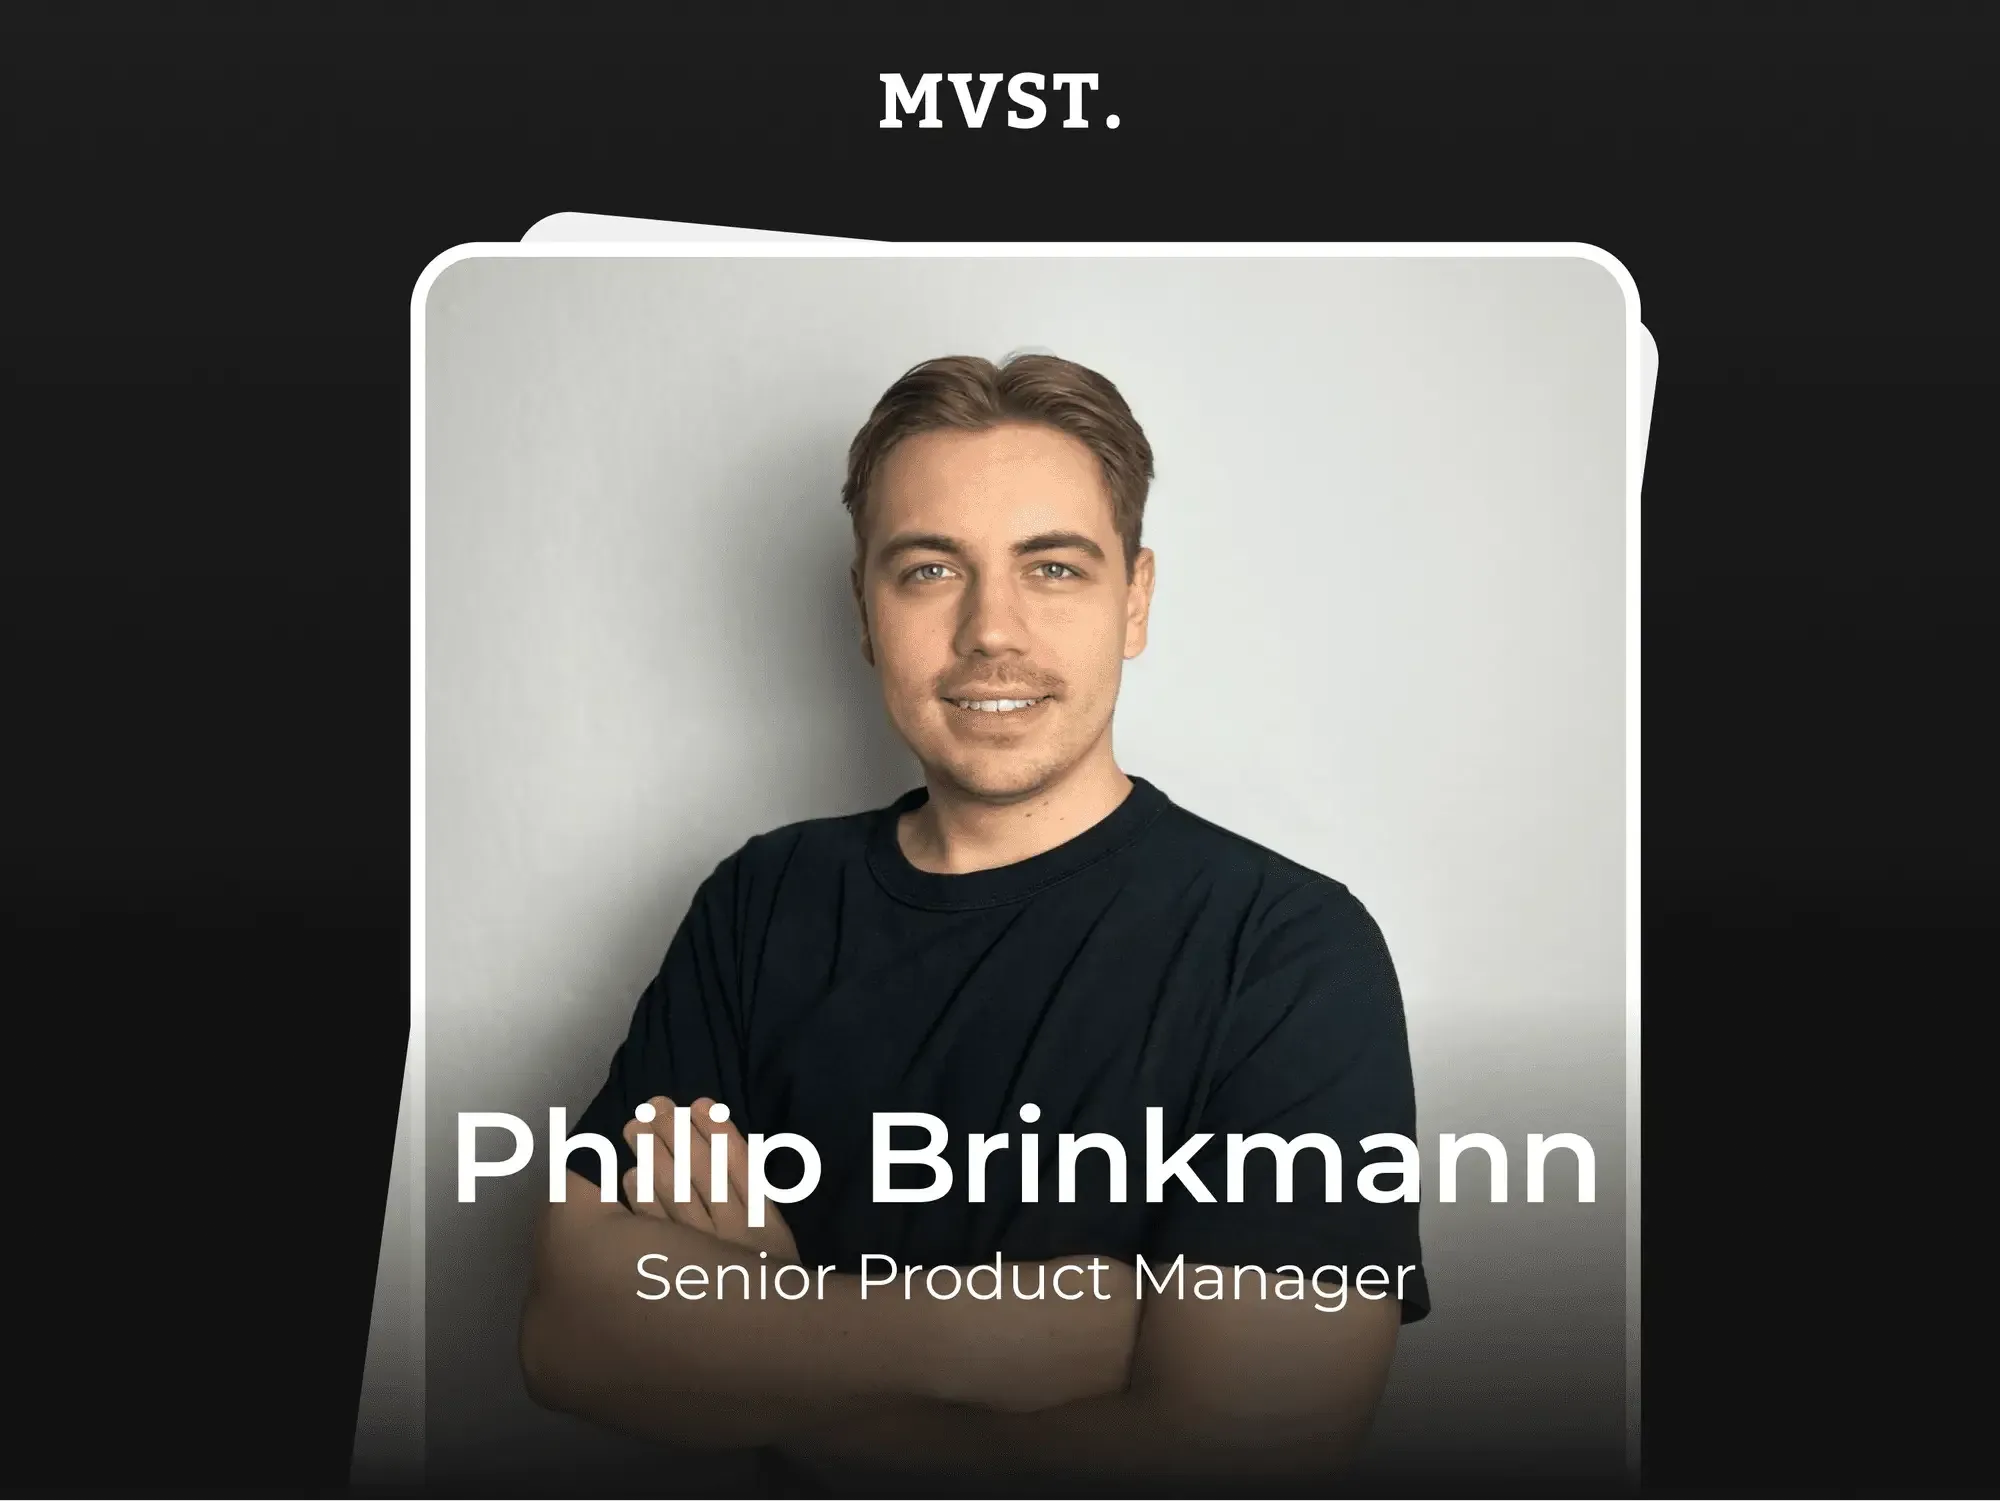 Welcome to MVST, Philip!